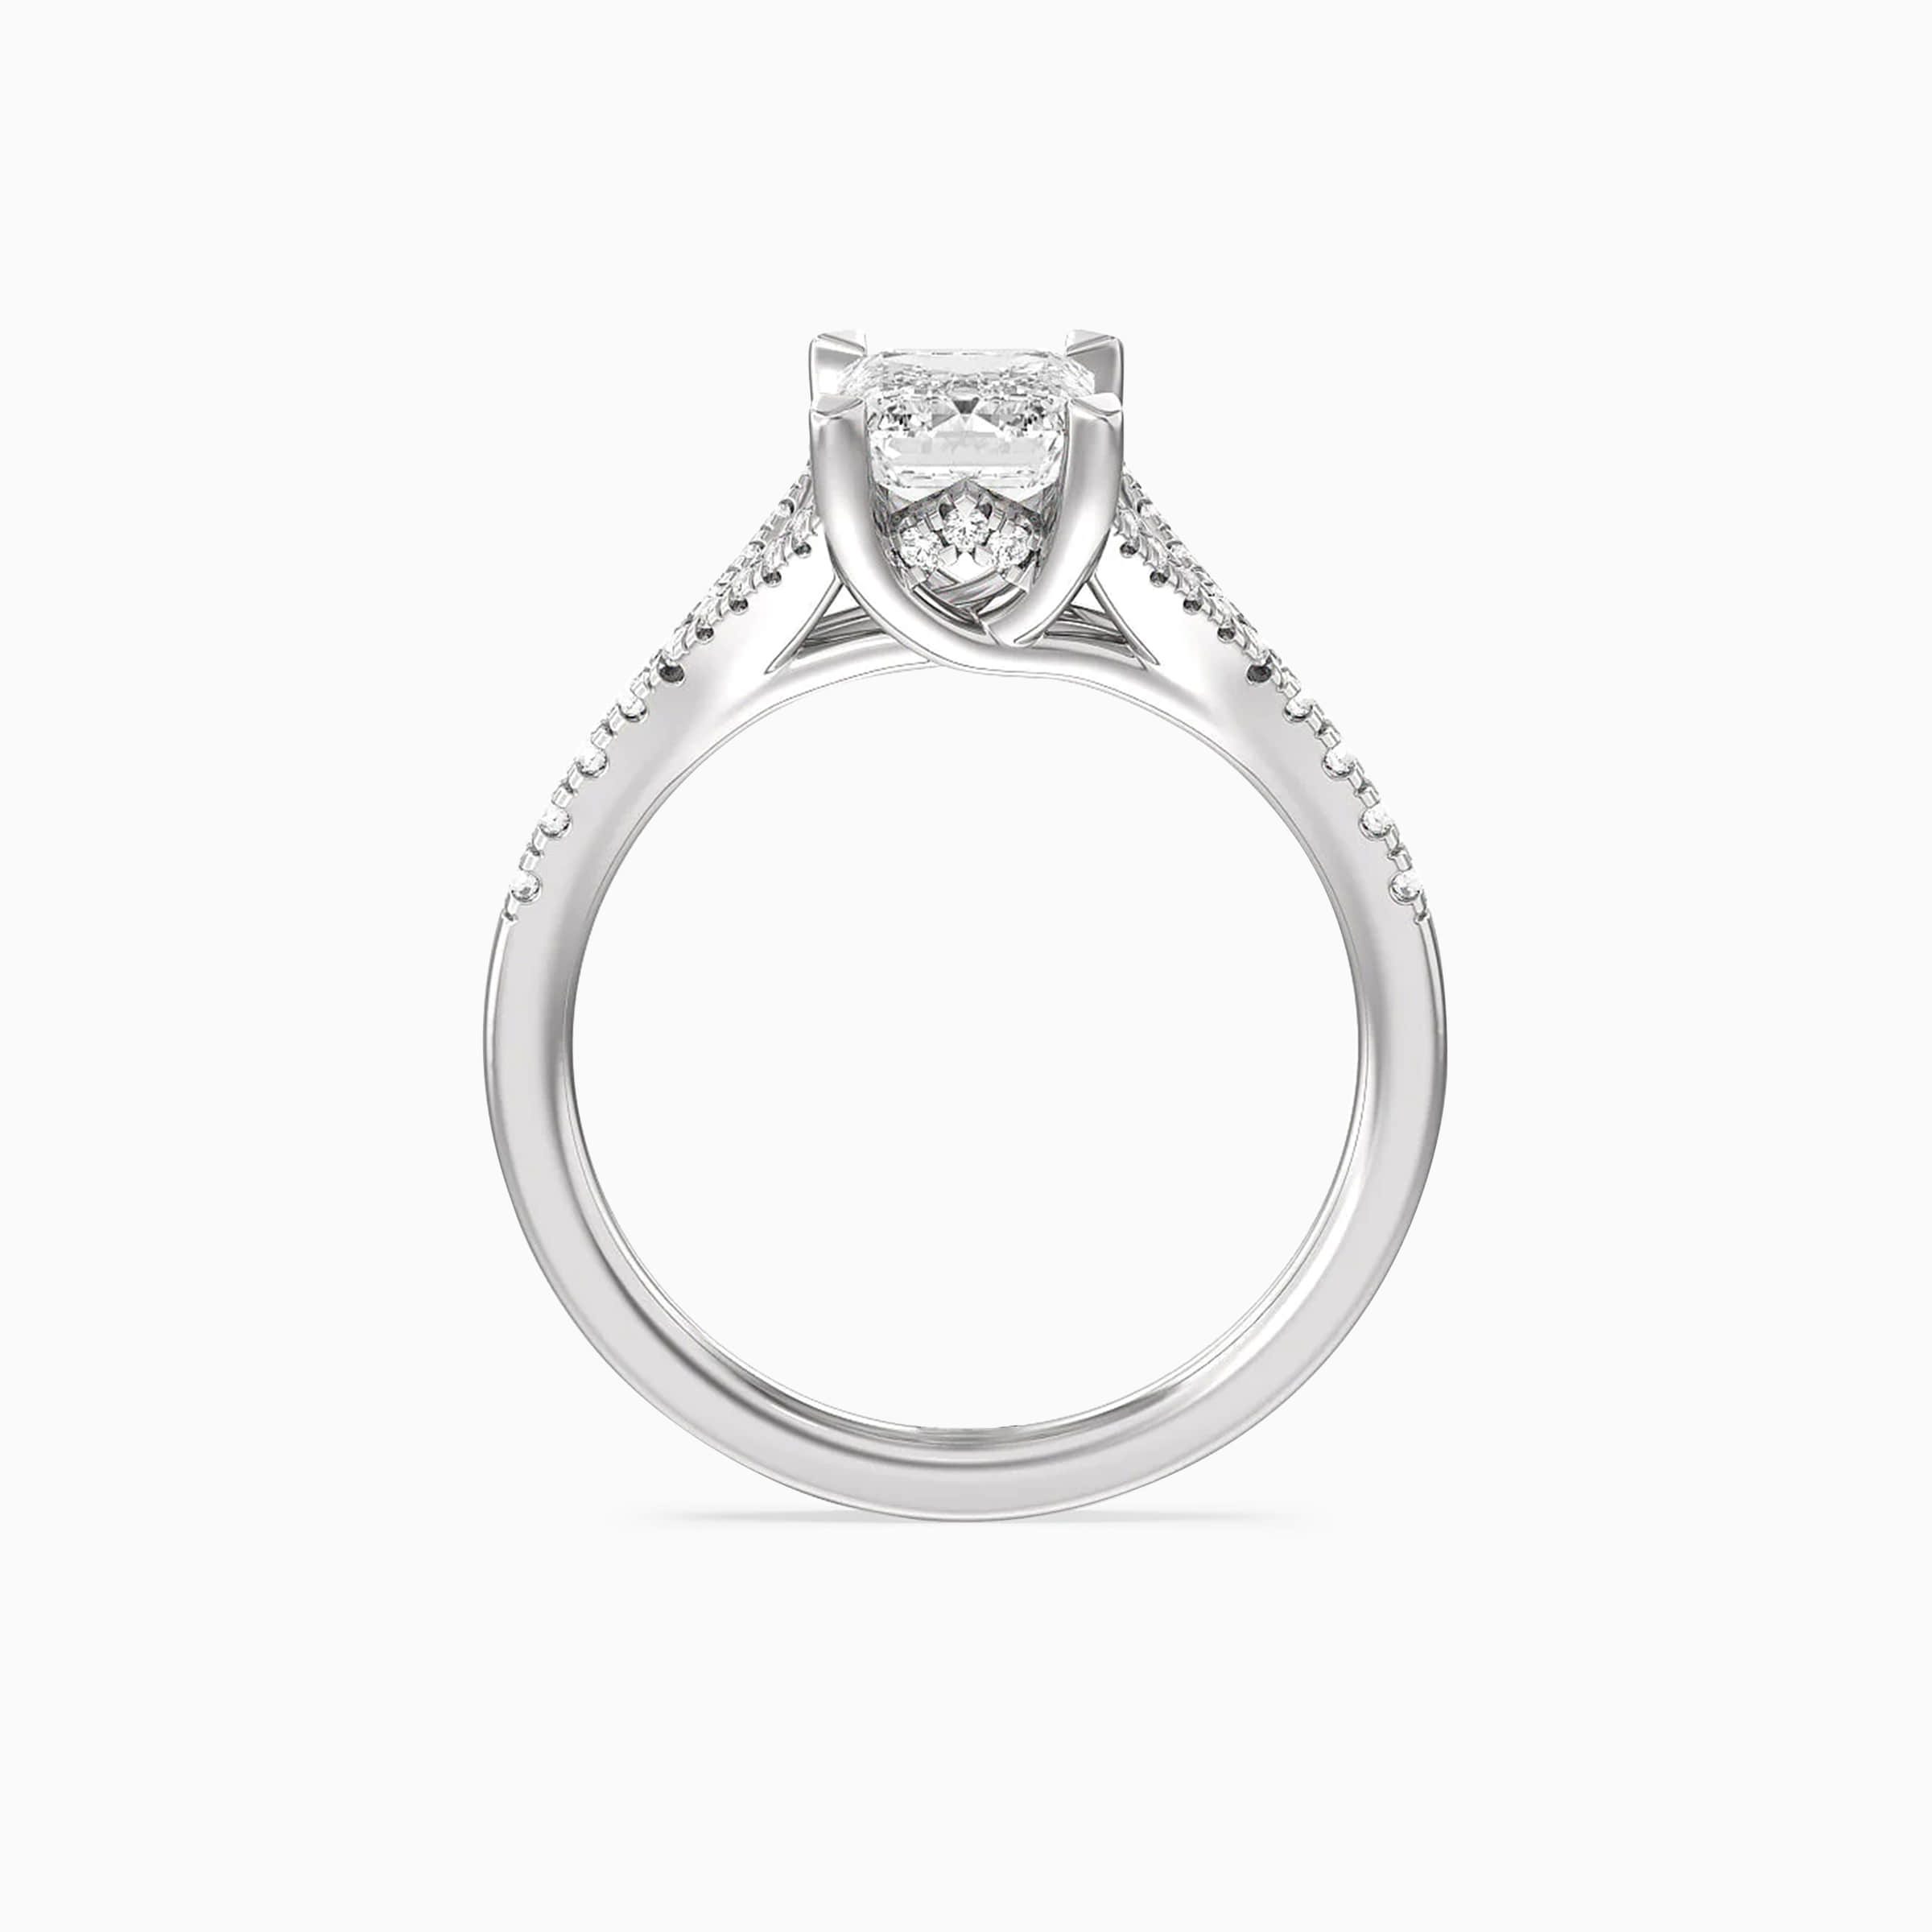 Darry Ring split shank emerald cut engagement ring in front view